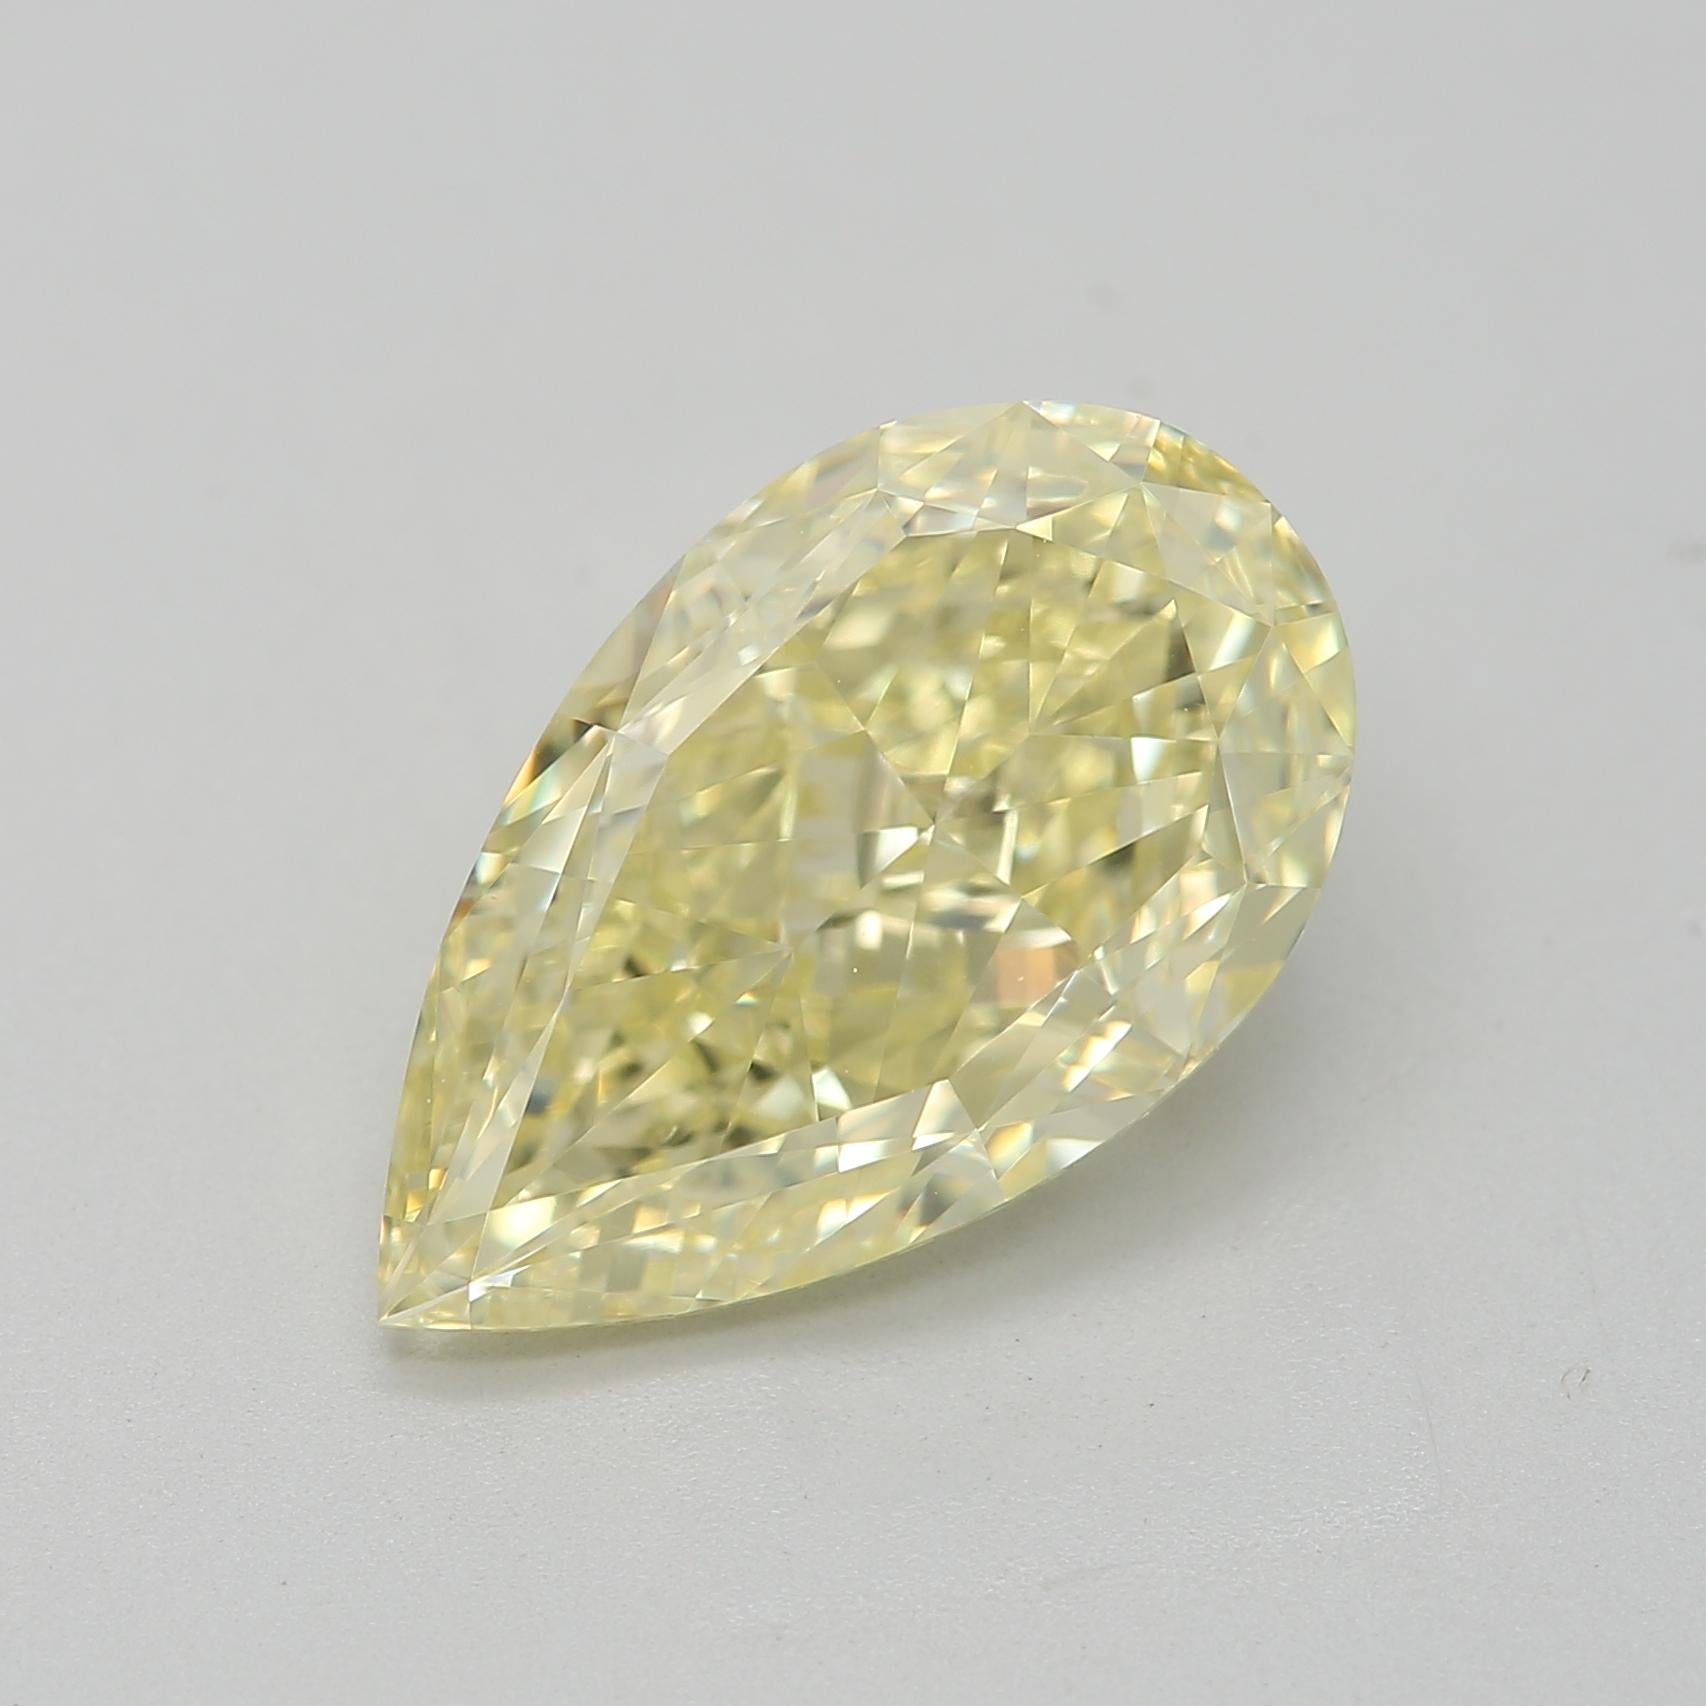 *100% NATURAL FANCY COLOUR DIAMOND*

✪ Diamond Details ✪

➛ Shape: Pear
➛ Colour Grade: Fancy Light Yellow
➛ Carat: 3.19
➛ Clarity: VS2
➛ GIA Certified 

^FEATURES OF THE DIAMOND^

This 3.19 carat diamond offers a significant size and presence. It